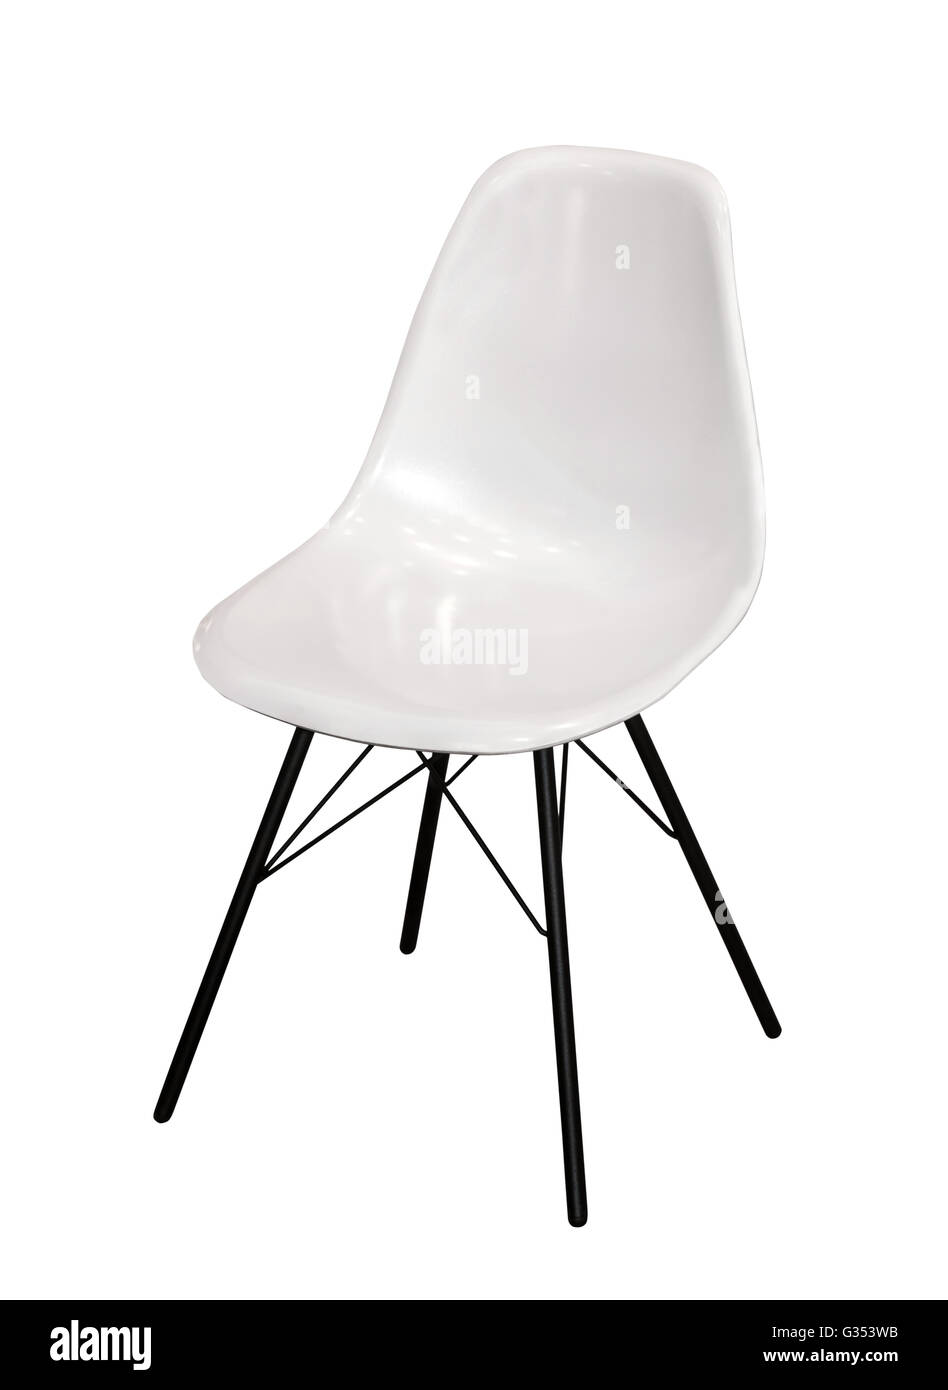 White plastic modern chair isolated Stock Photo